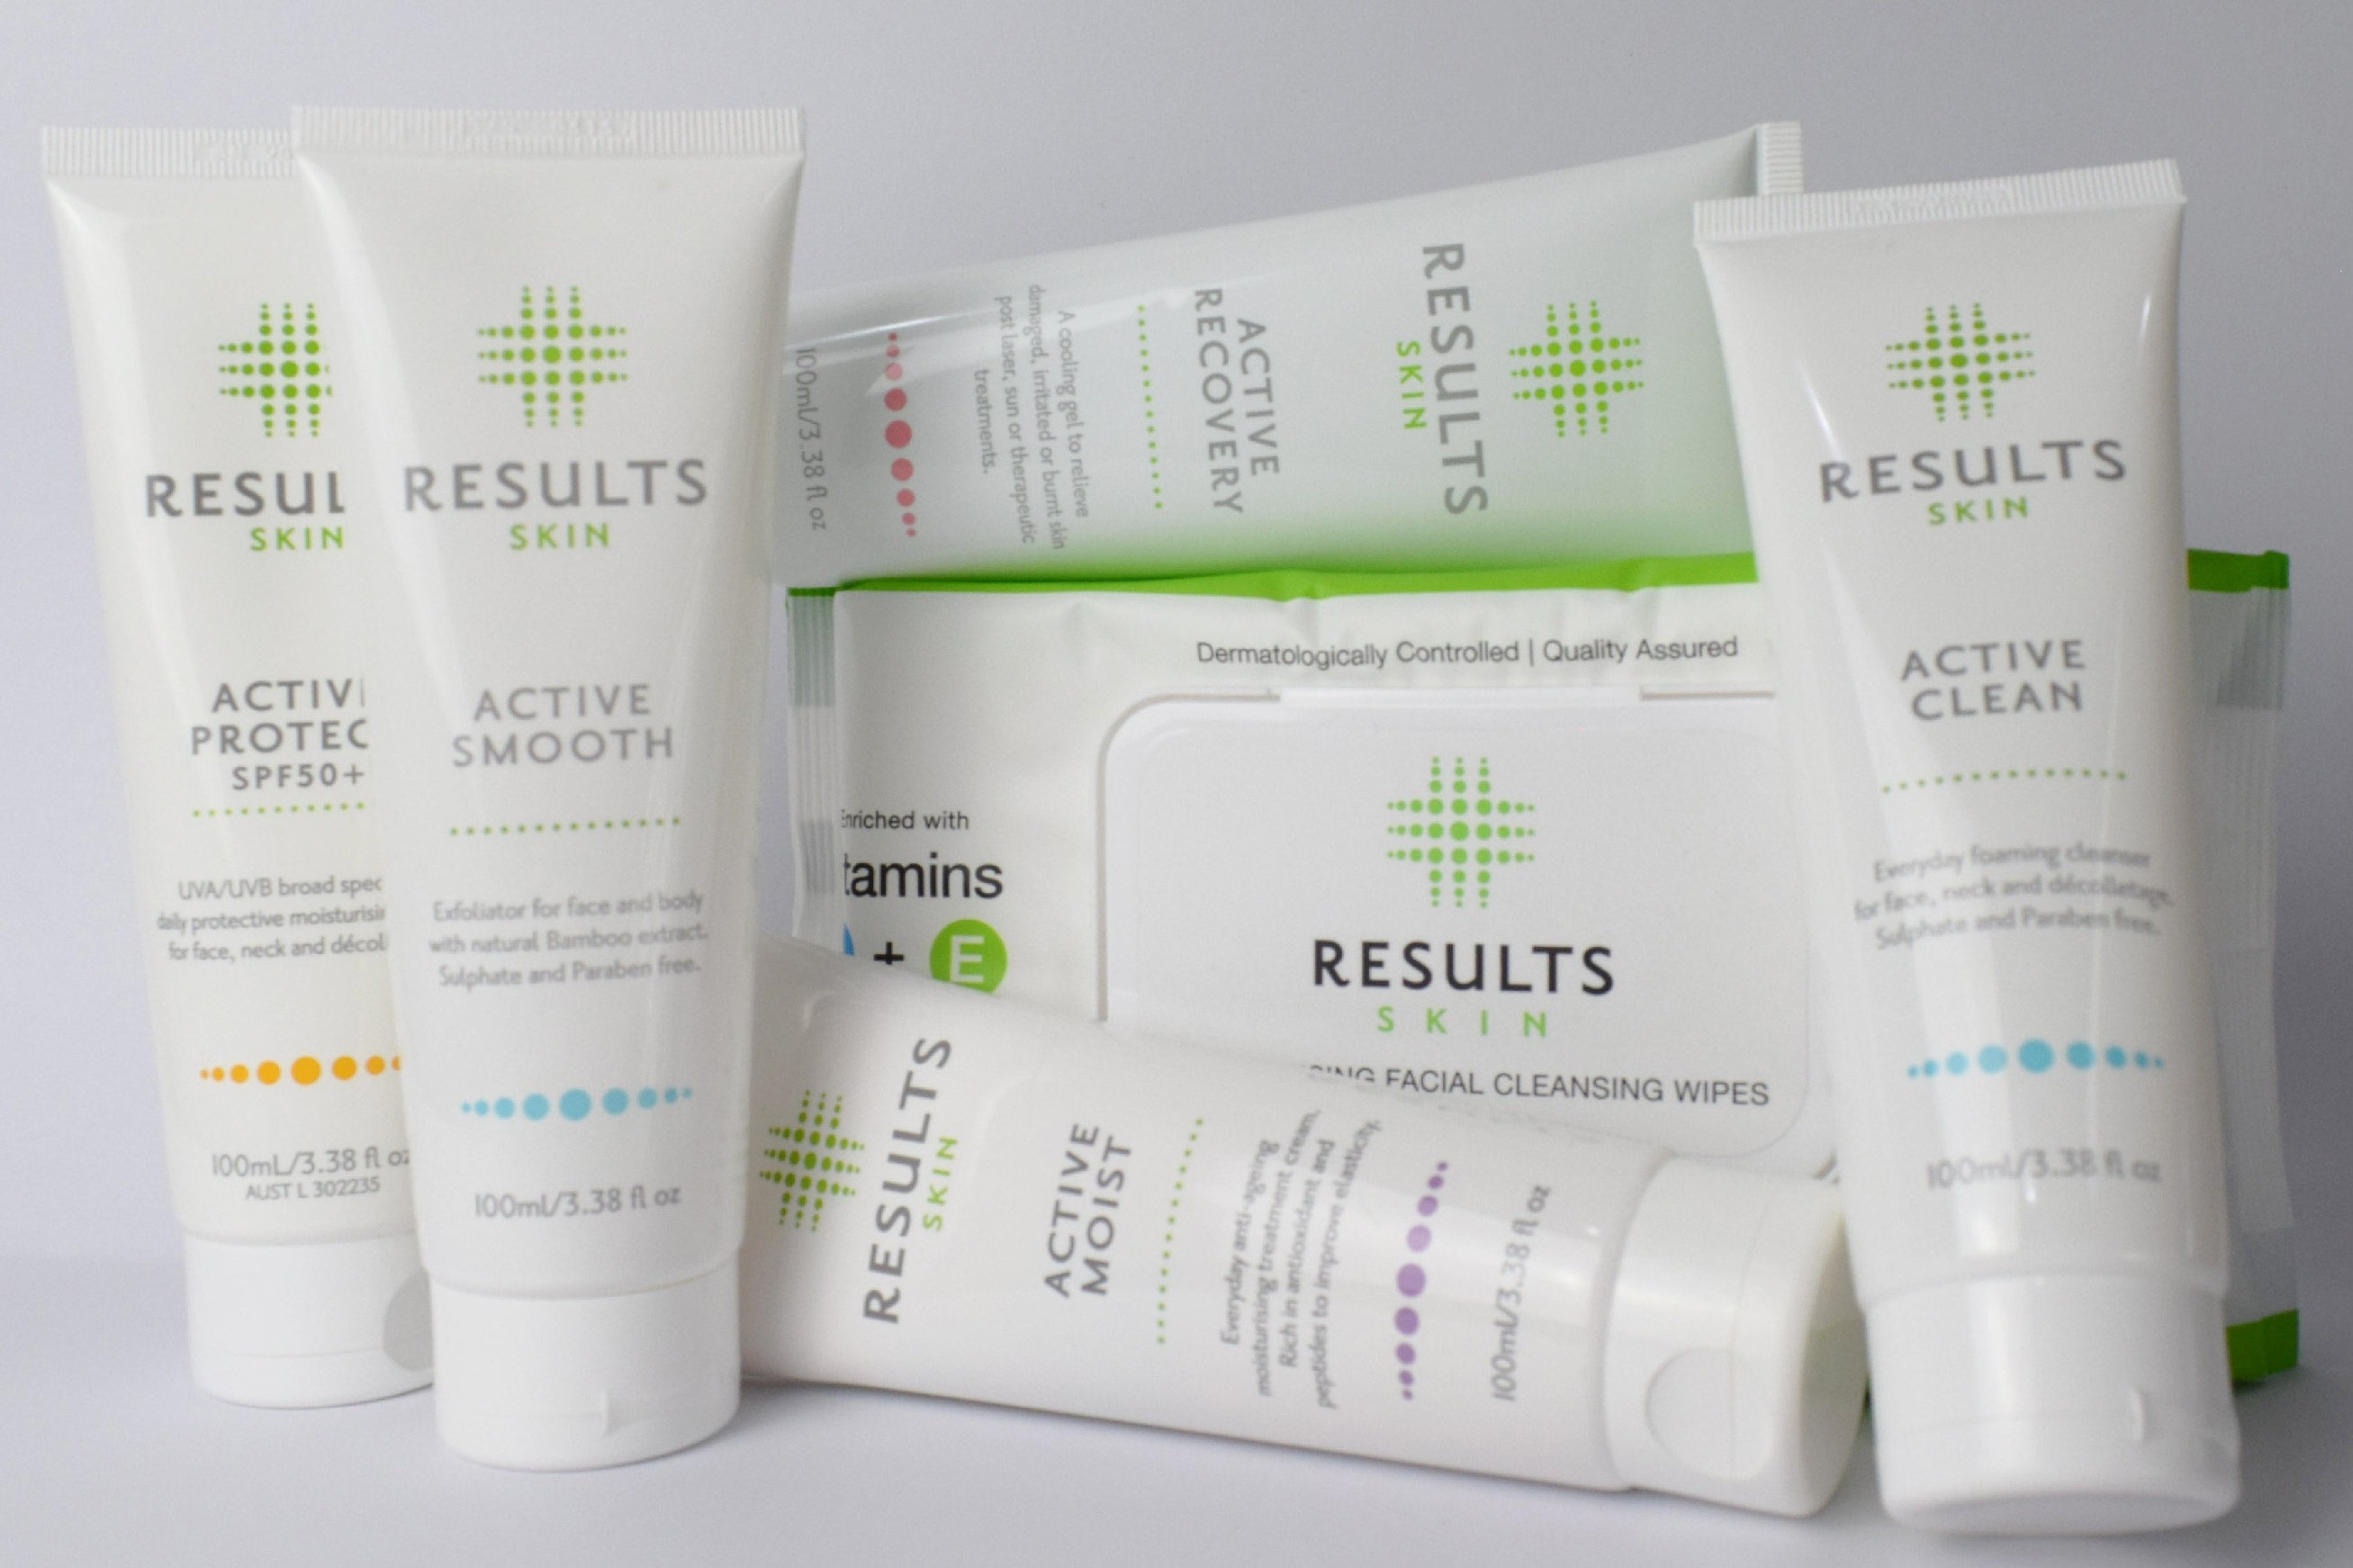 Results Active Skincare - Skincare made simple